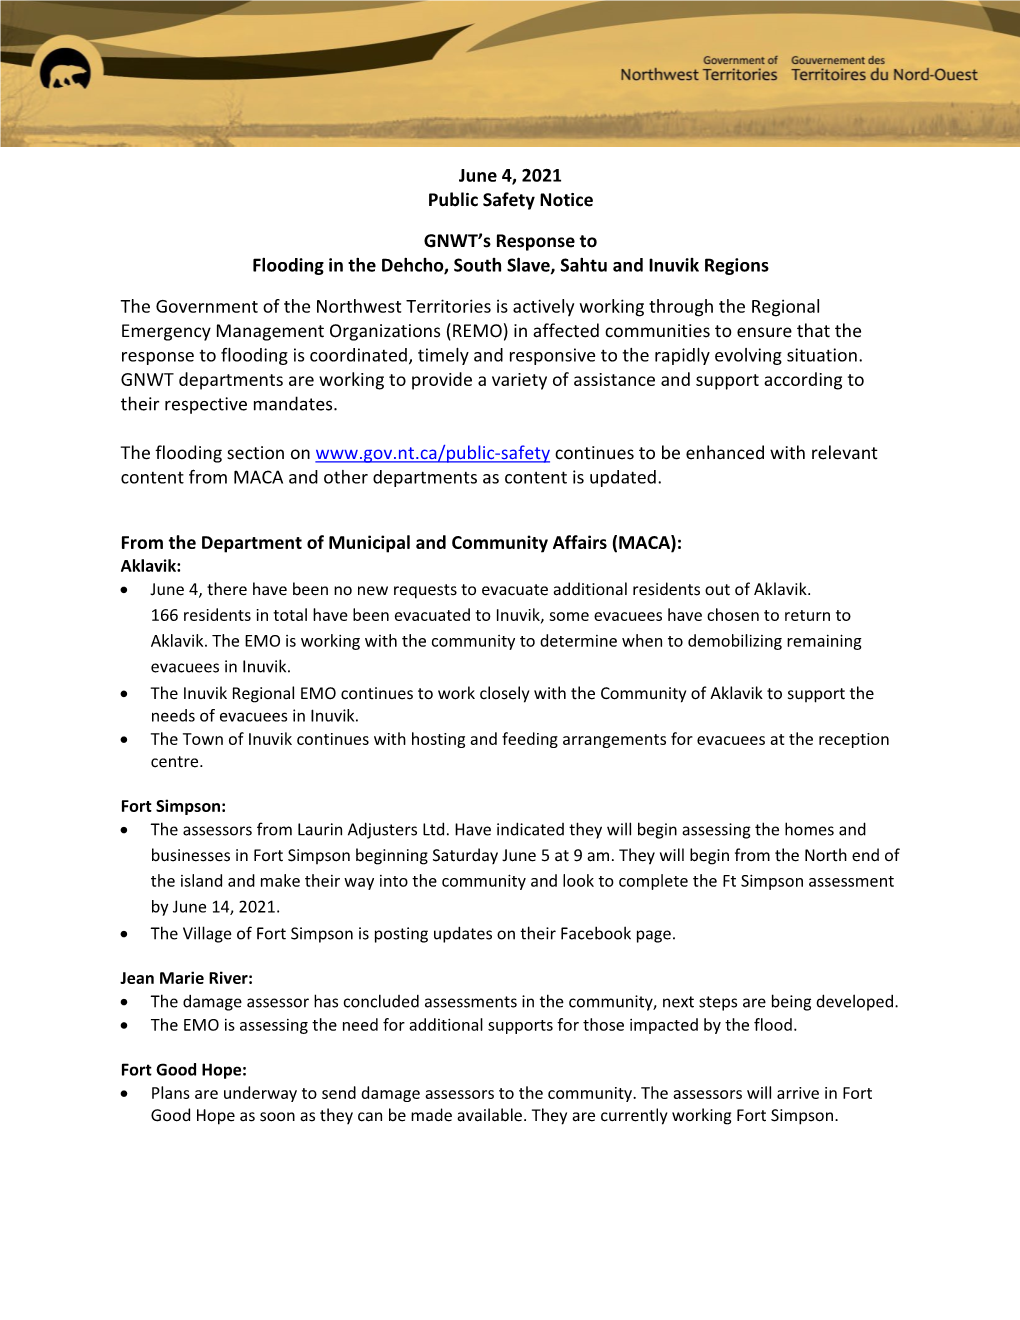 June 4, 2021 Public Safety Notice GNWT's Response to Flooding In